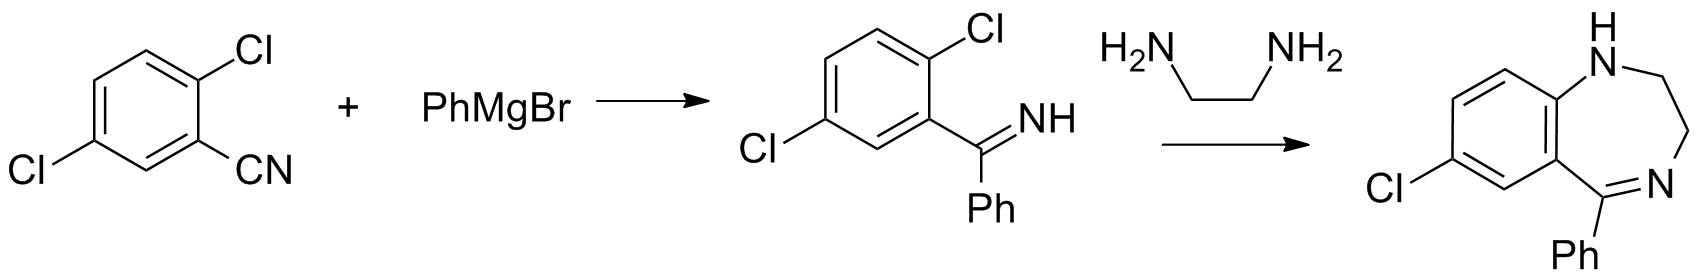 File:Medazepam synthesis 3.png